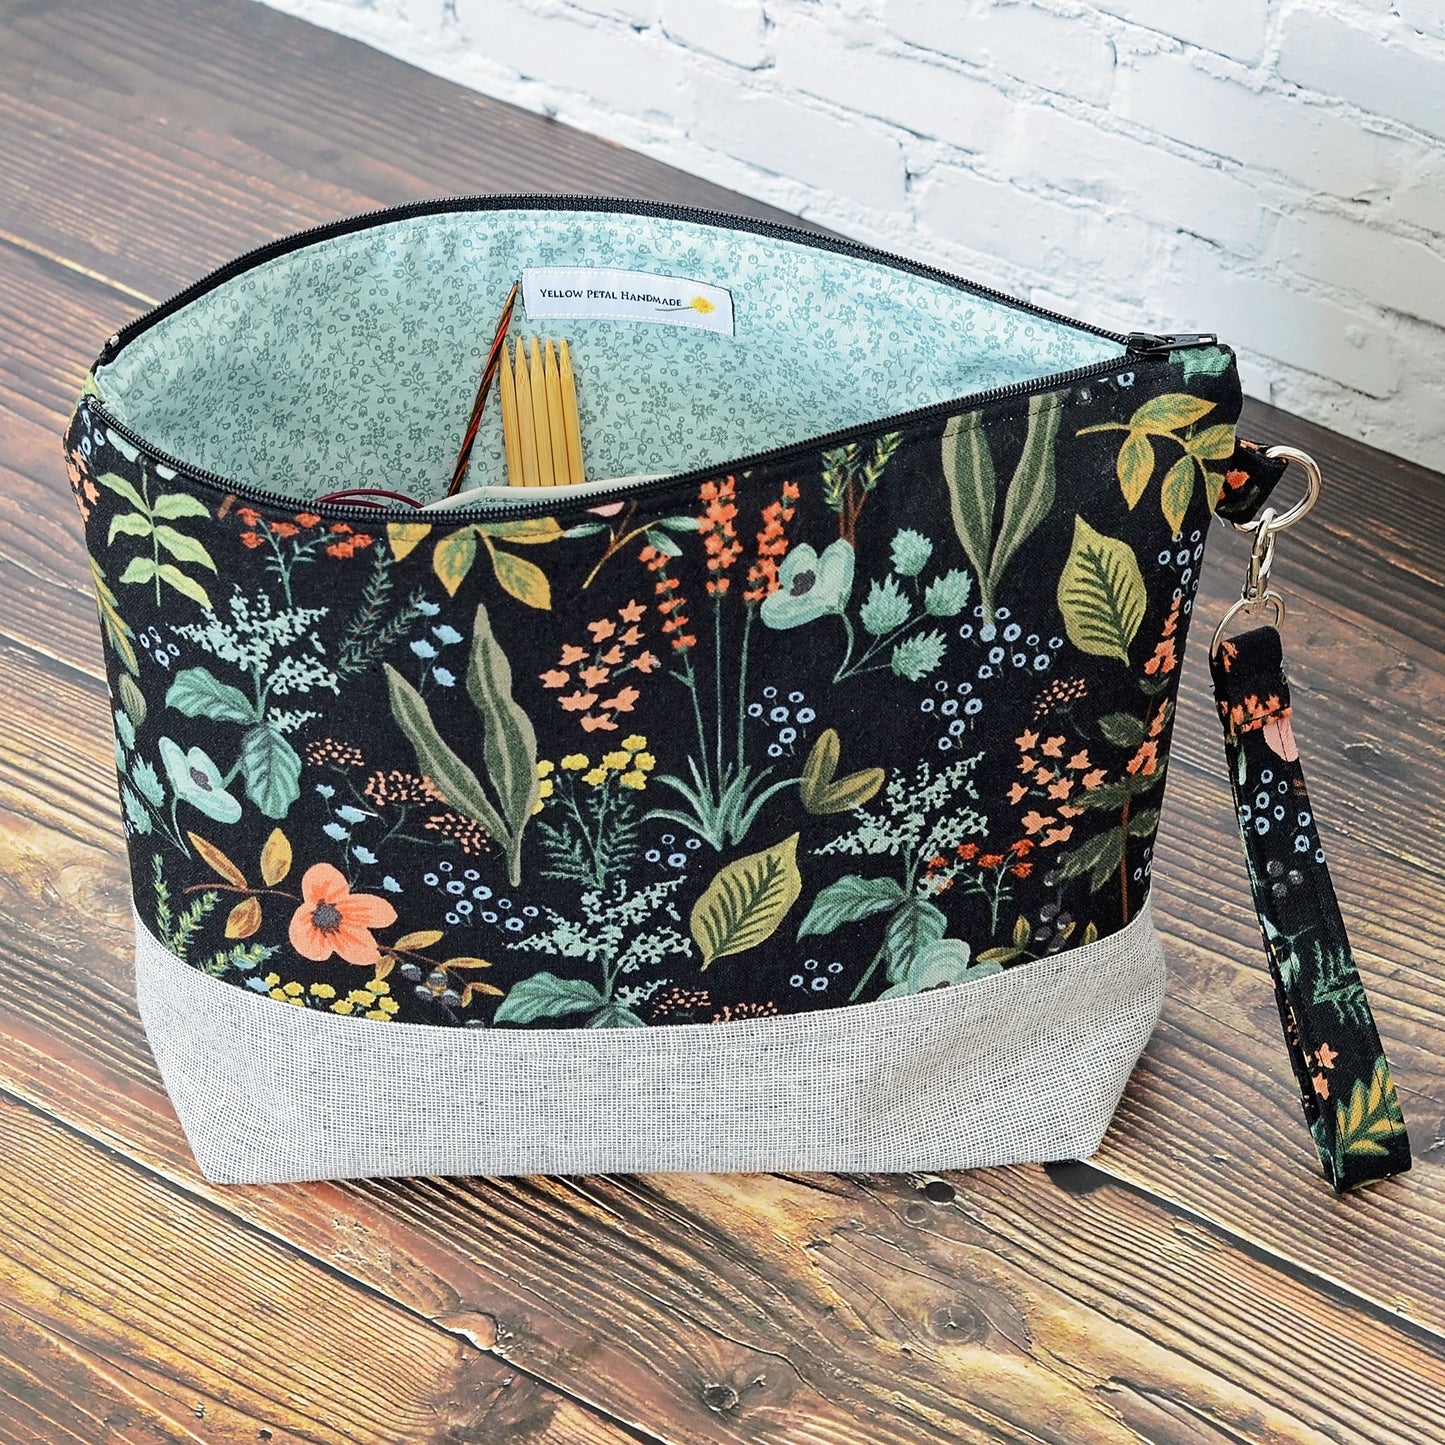 Zippered Project Bag or Pouch in Rifle Paper Co Fabric